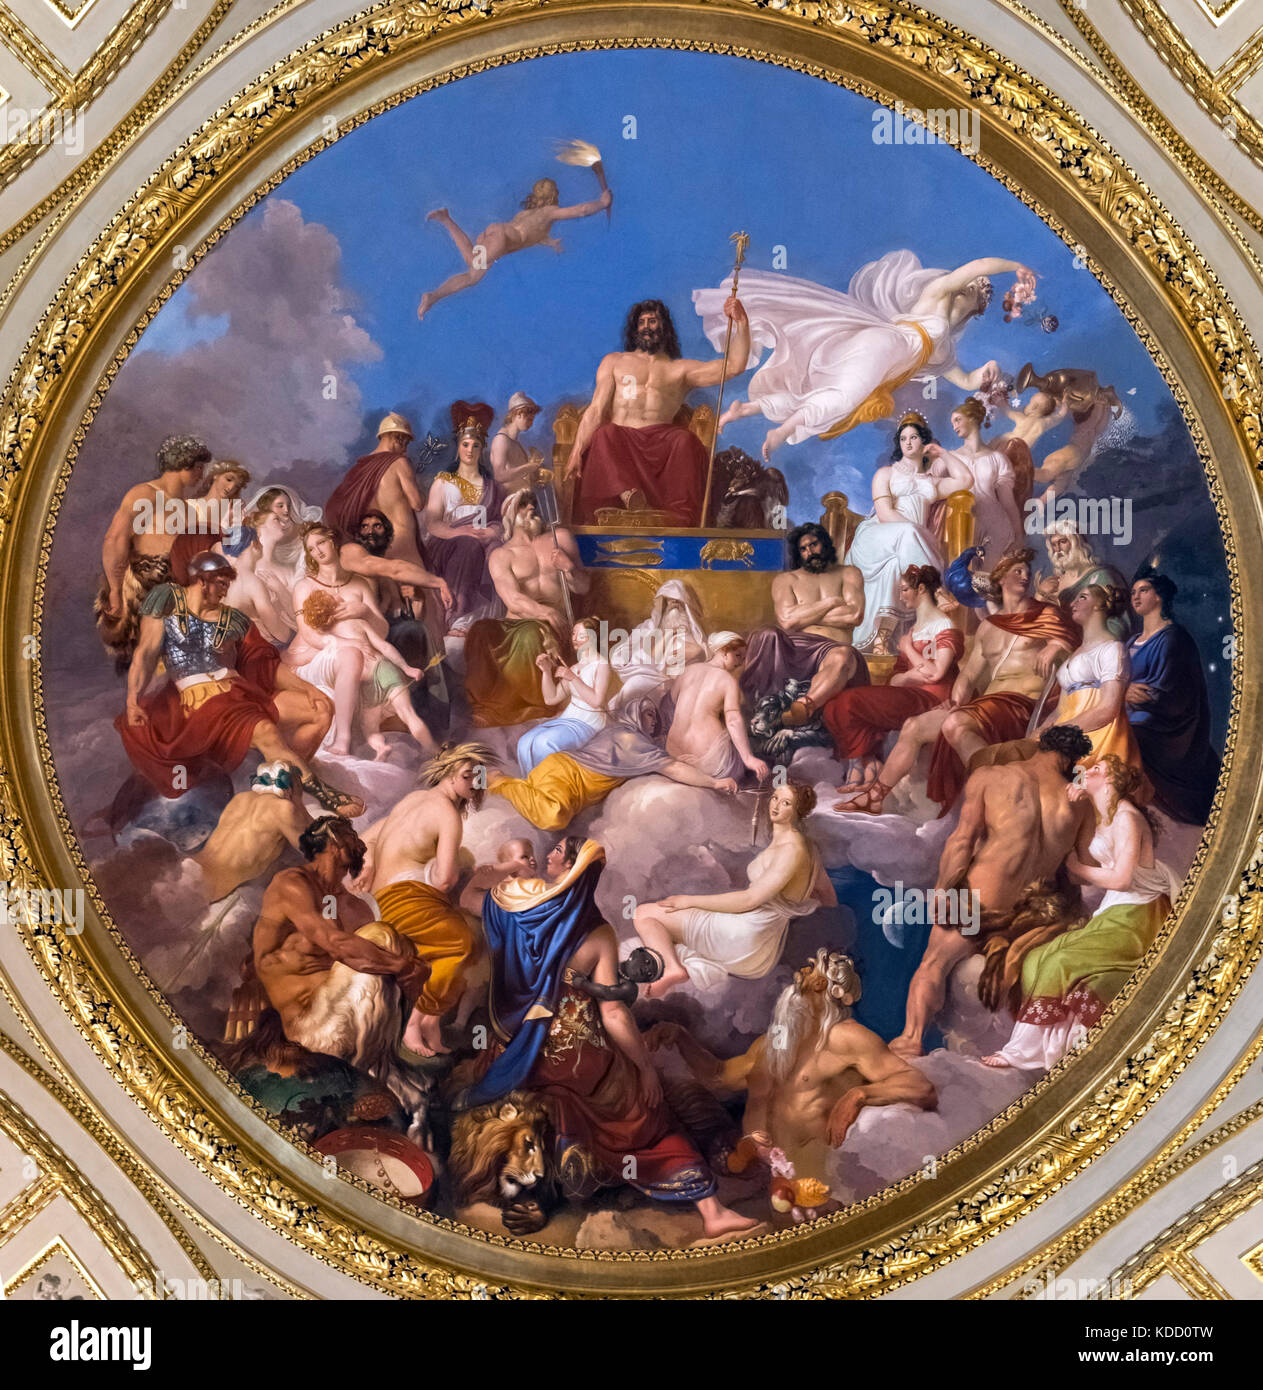 Assembly of the Gods presided over by Jupiter, painting on the ceiling of the Iliad Room, Palatine Gallery, Palazzo Pitti (Pitti Palace), Florence, Italy. Stock Photo